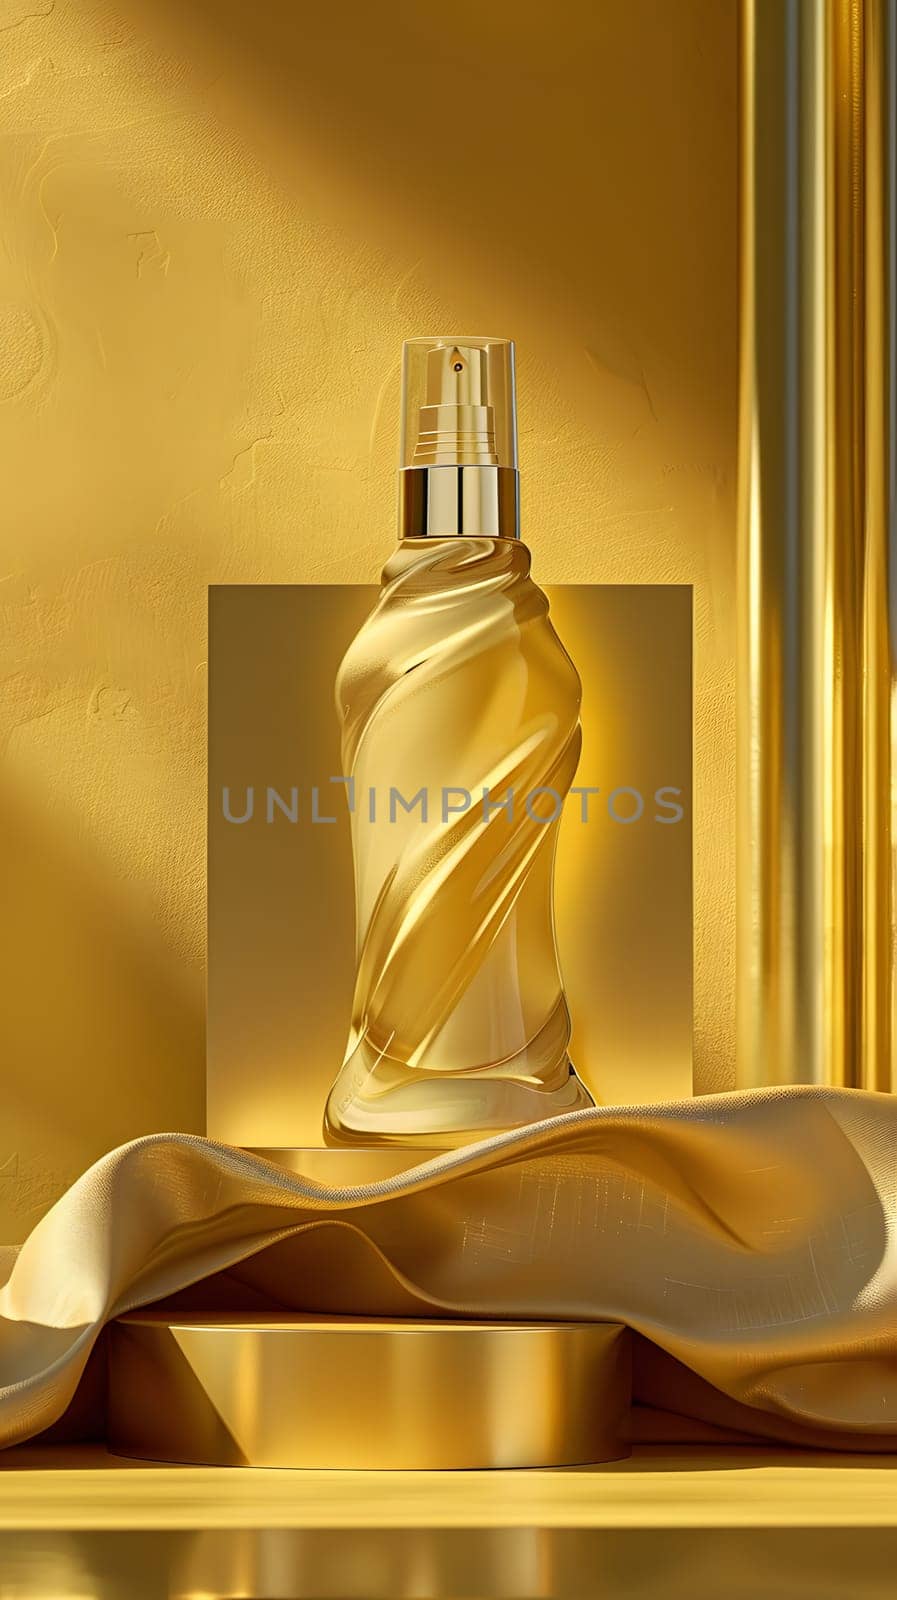 An elegant bottle of Amber liquid perfume sits on a Gold rectangular shelf made of Metal and Wood, surrounded by Transparent Glass. A true work of Art and fashion accessory